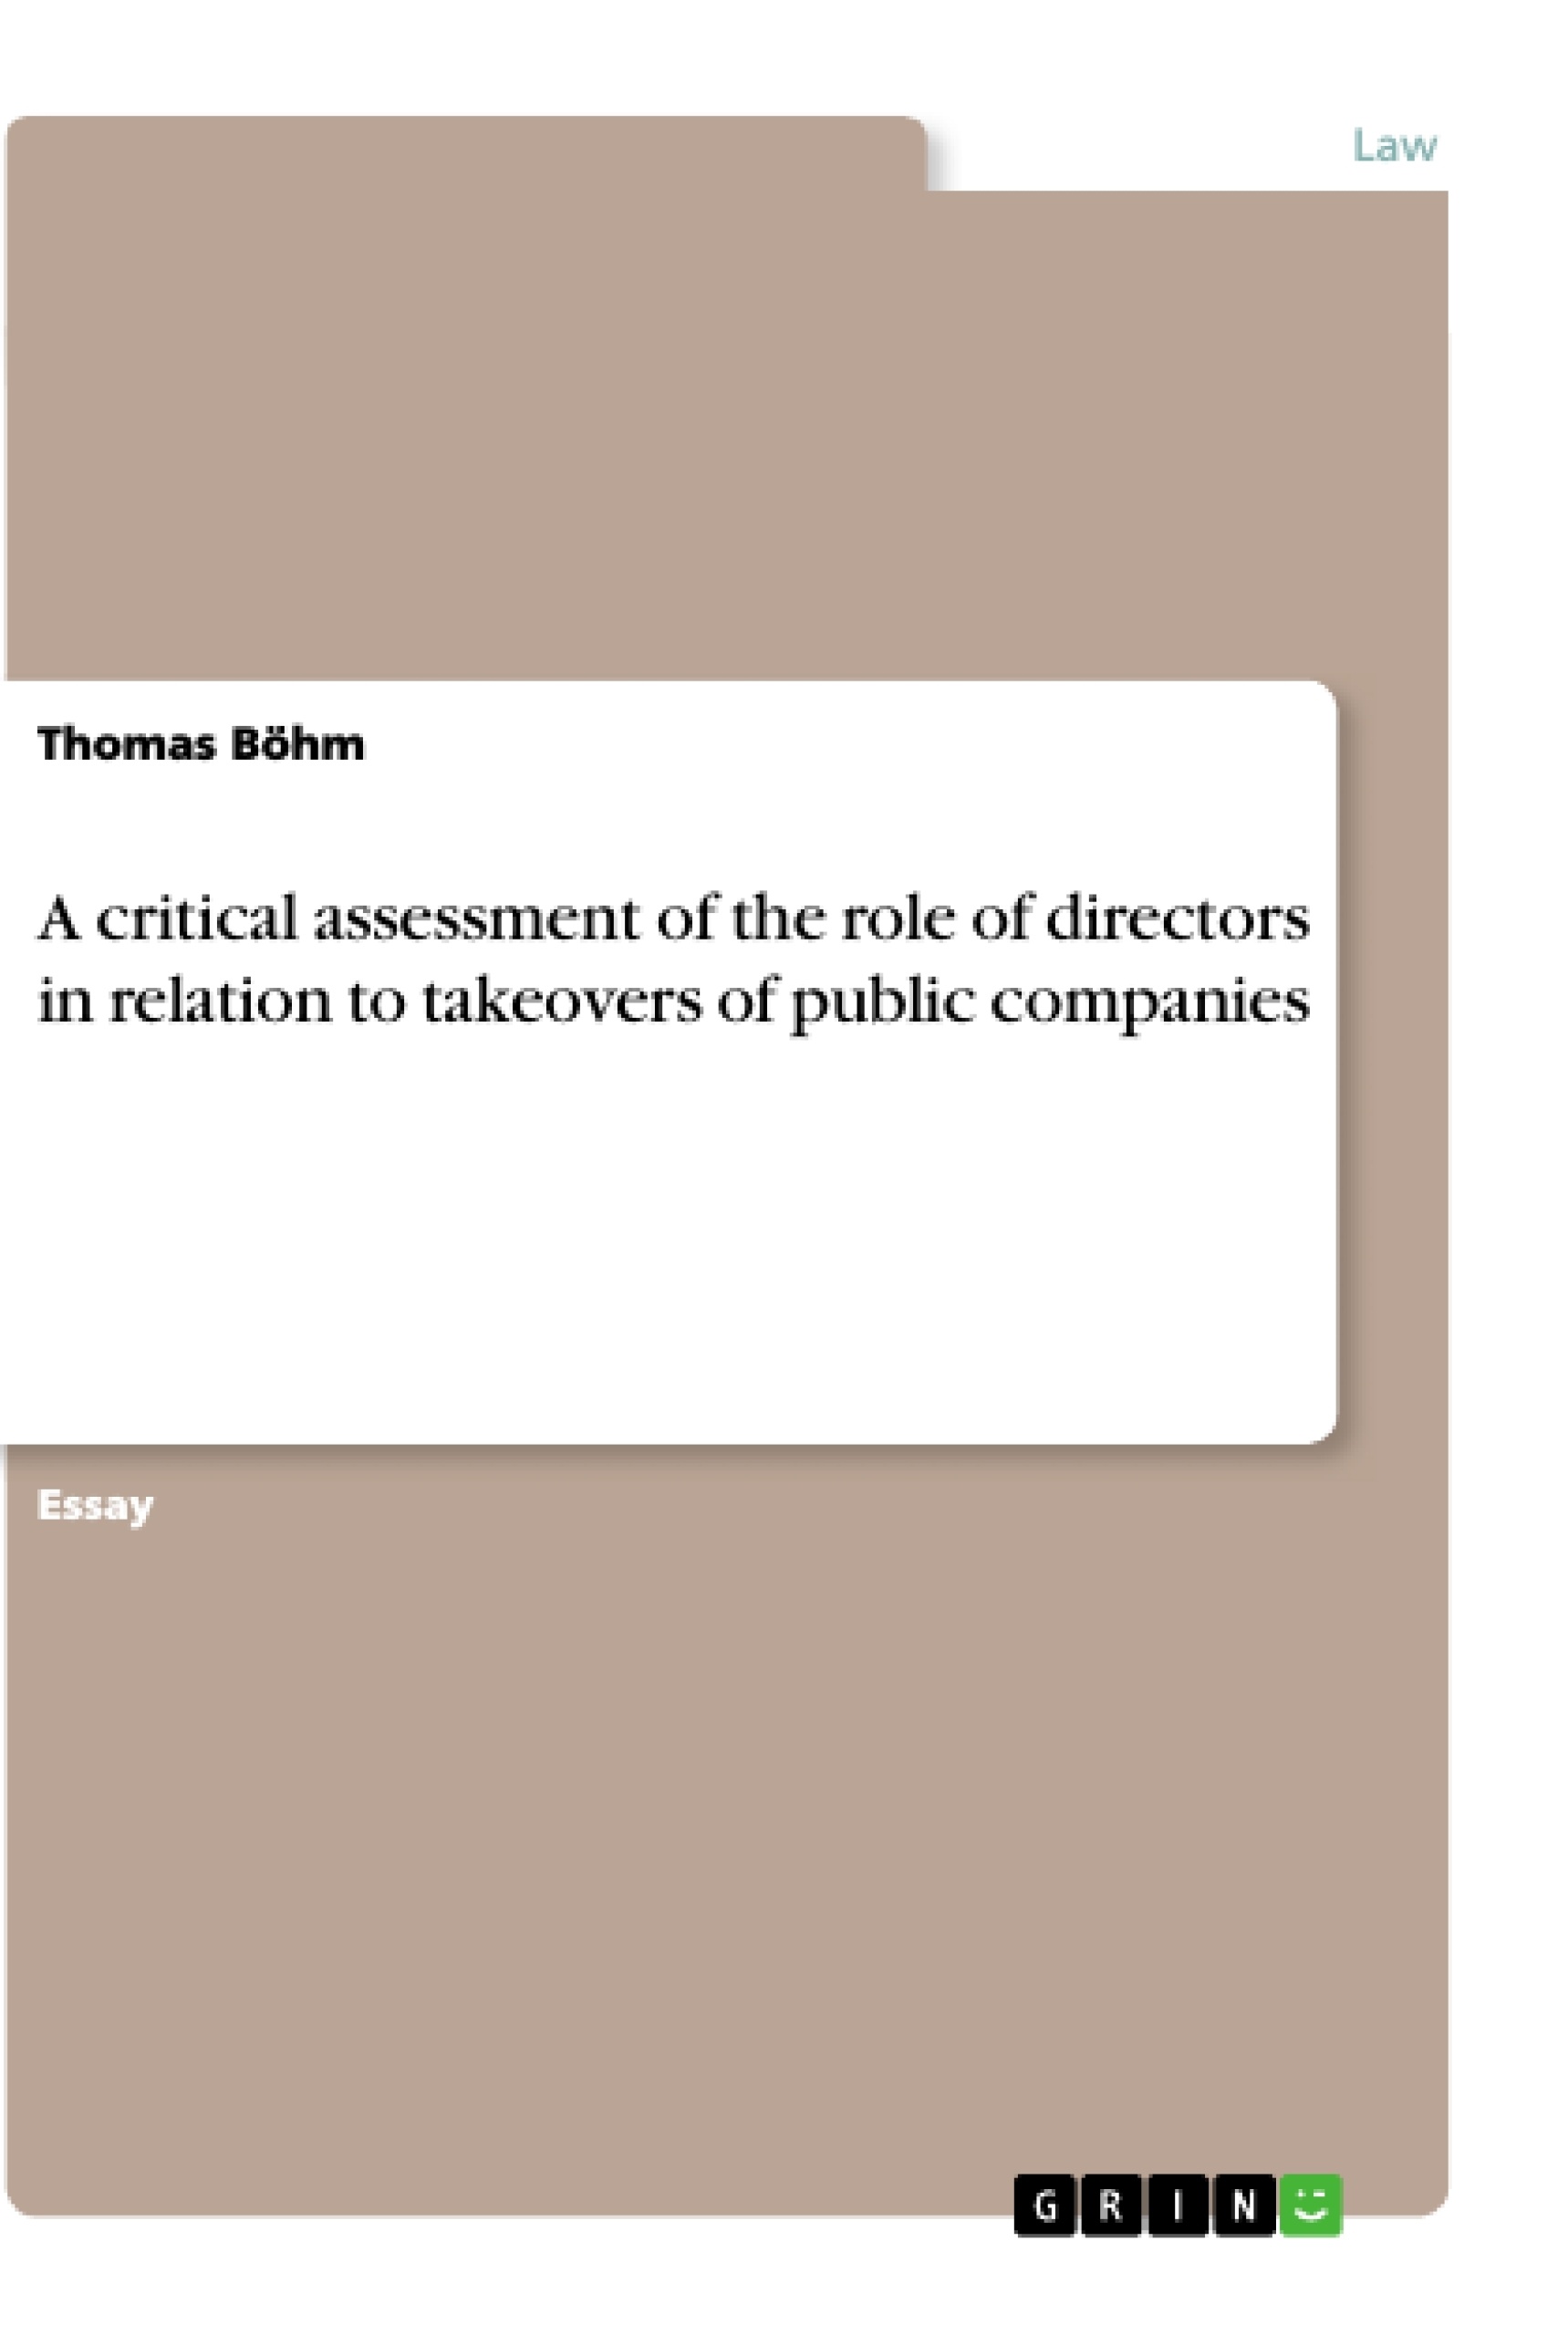 Title: A critical assessment of the role of directors in relation to takeovers of public companies